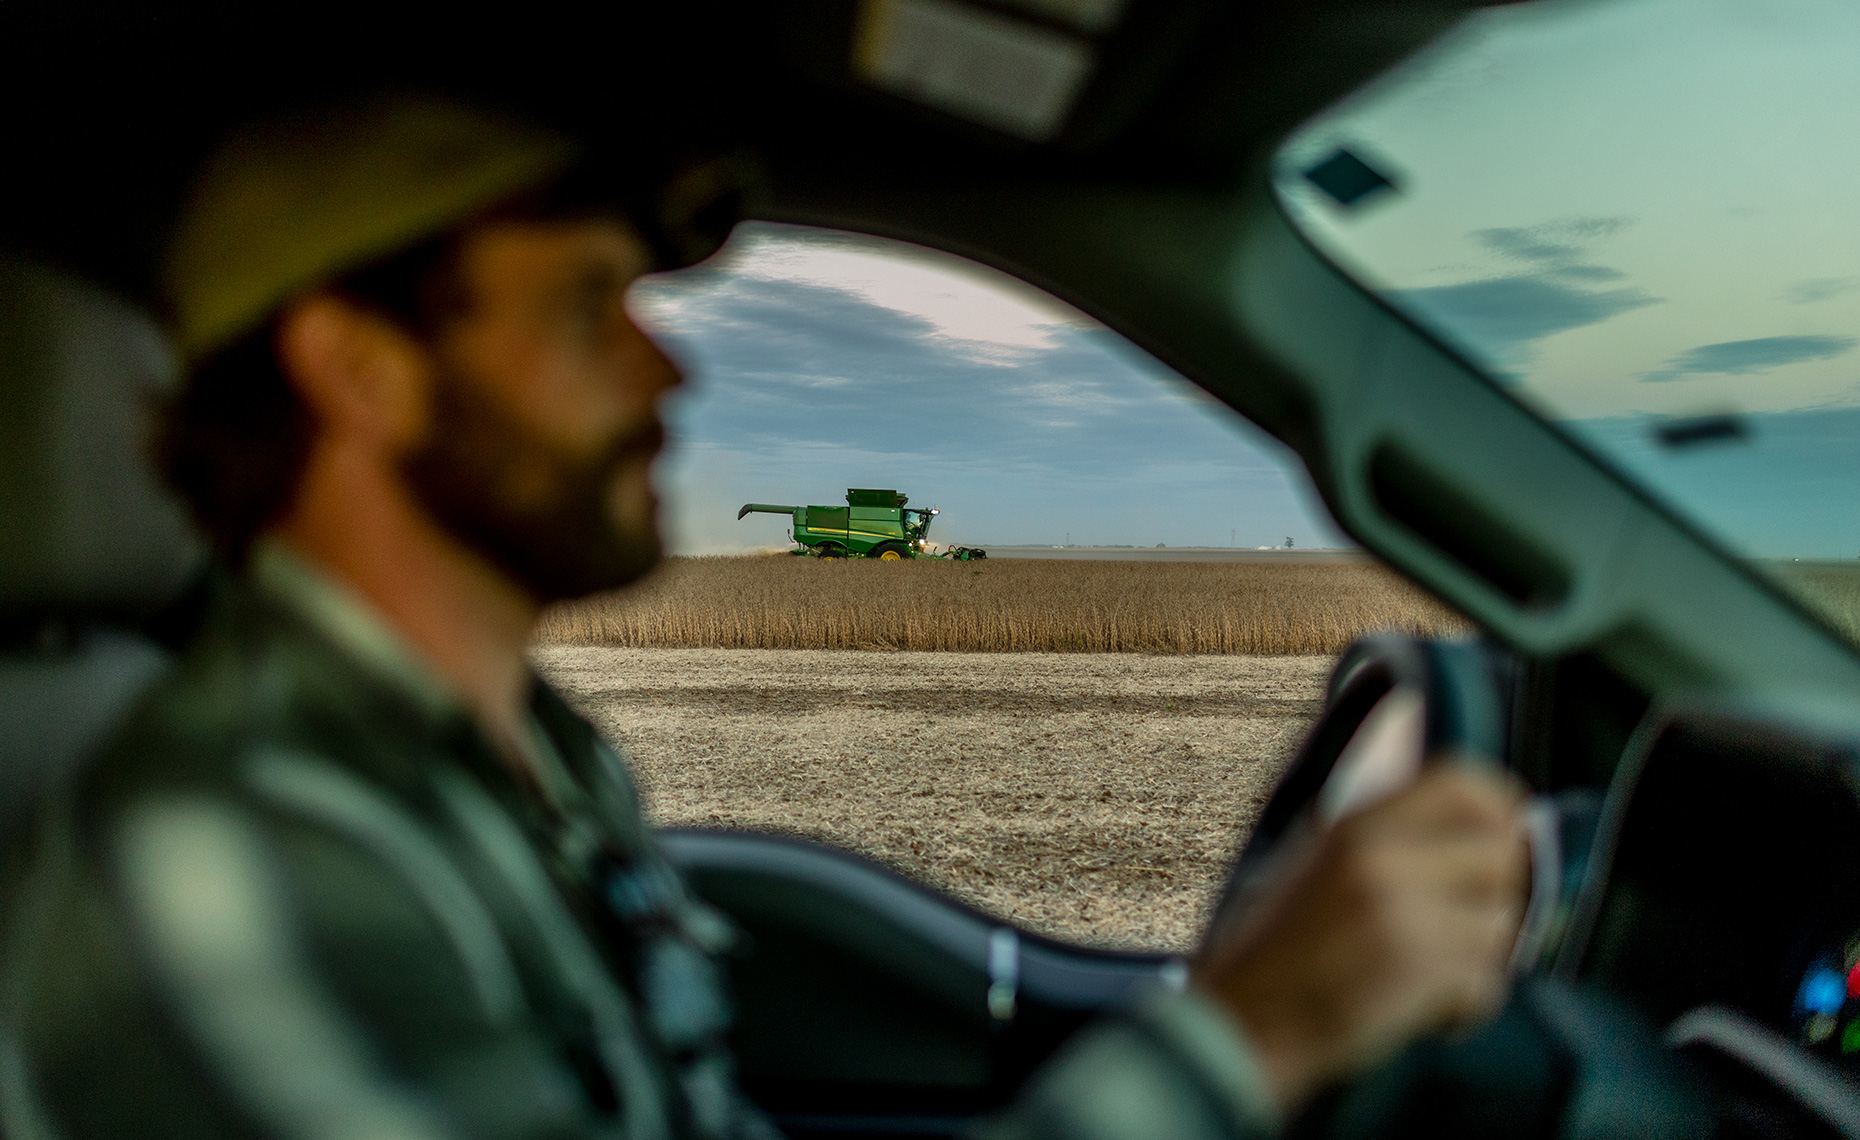 Rubinstein Photographer + Director| Agriculture |Minneapolis, Minnesota Advertising, Editorial, Portrait and Corporate  Photographer | Photojournalism | Storytelling